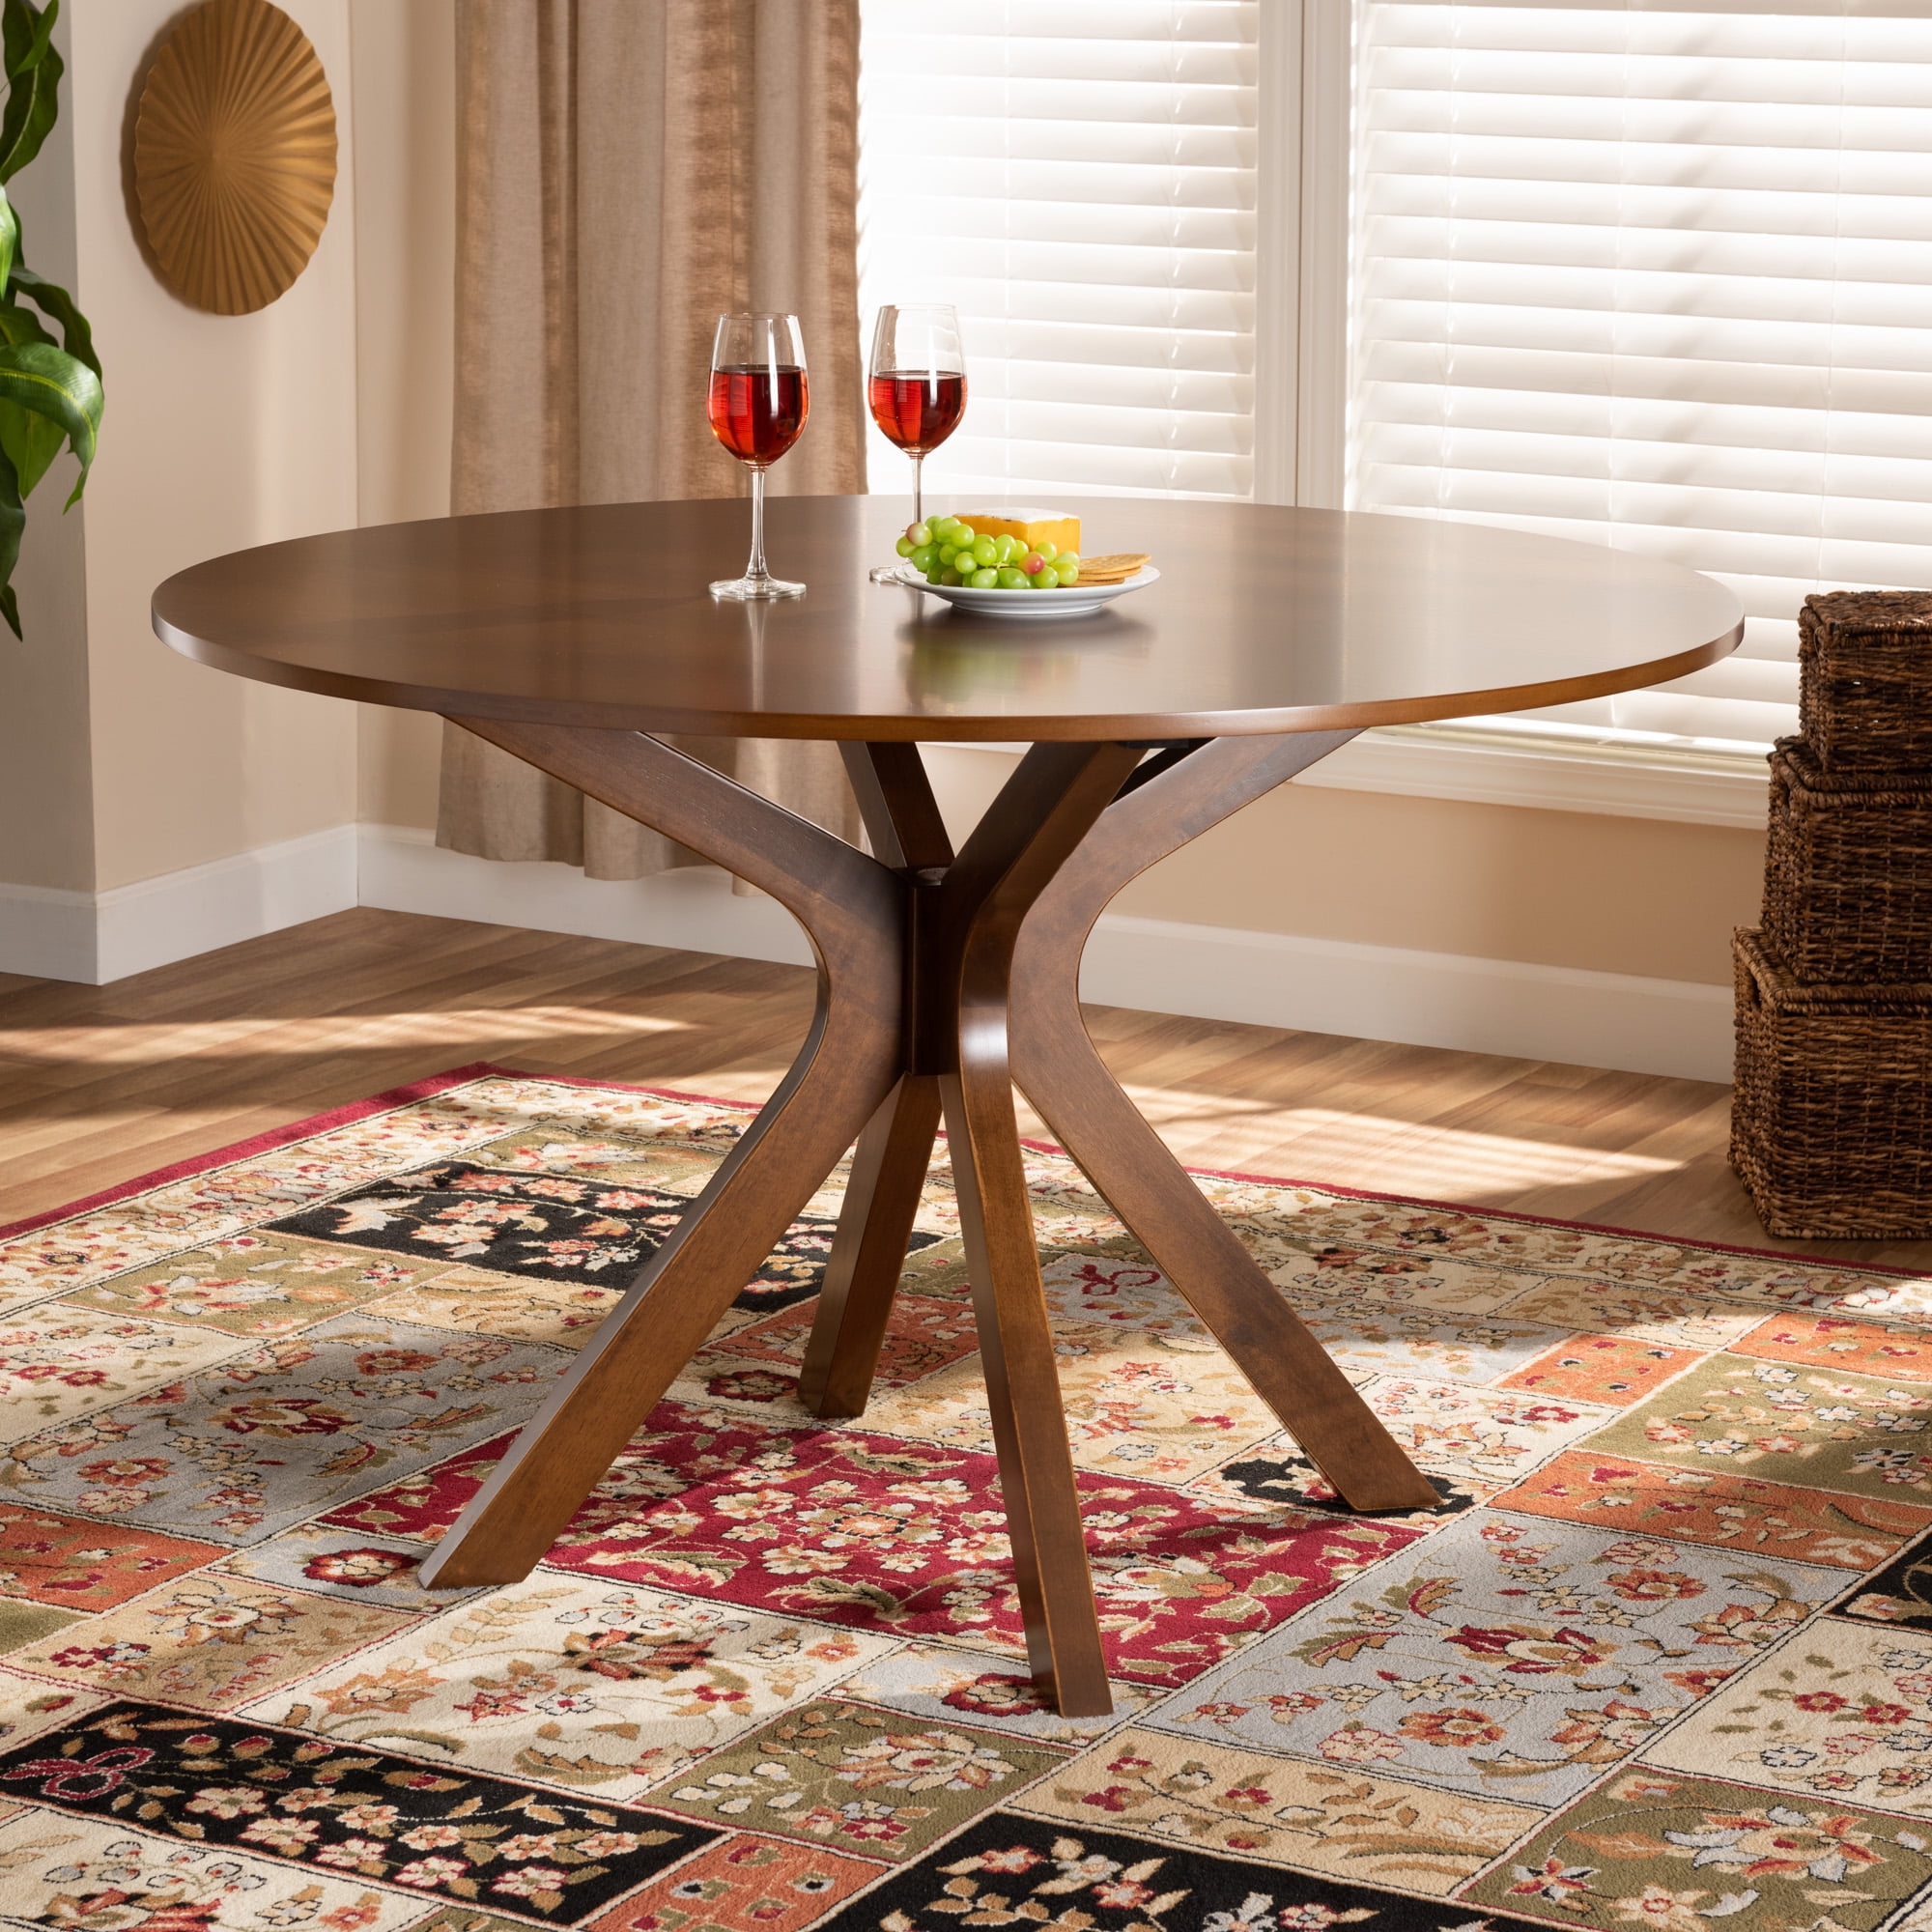 48 Inch Wide Round Wood Dining Table, Round Table Walnut Creek Treat